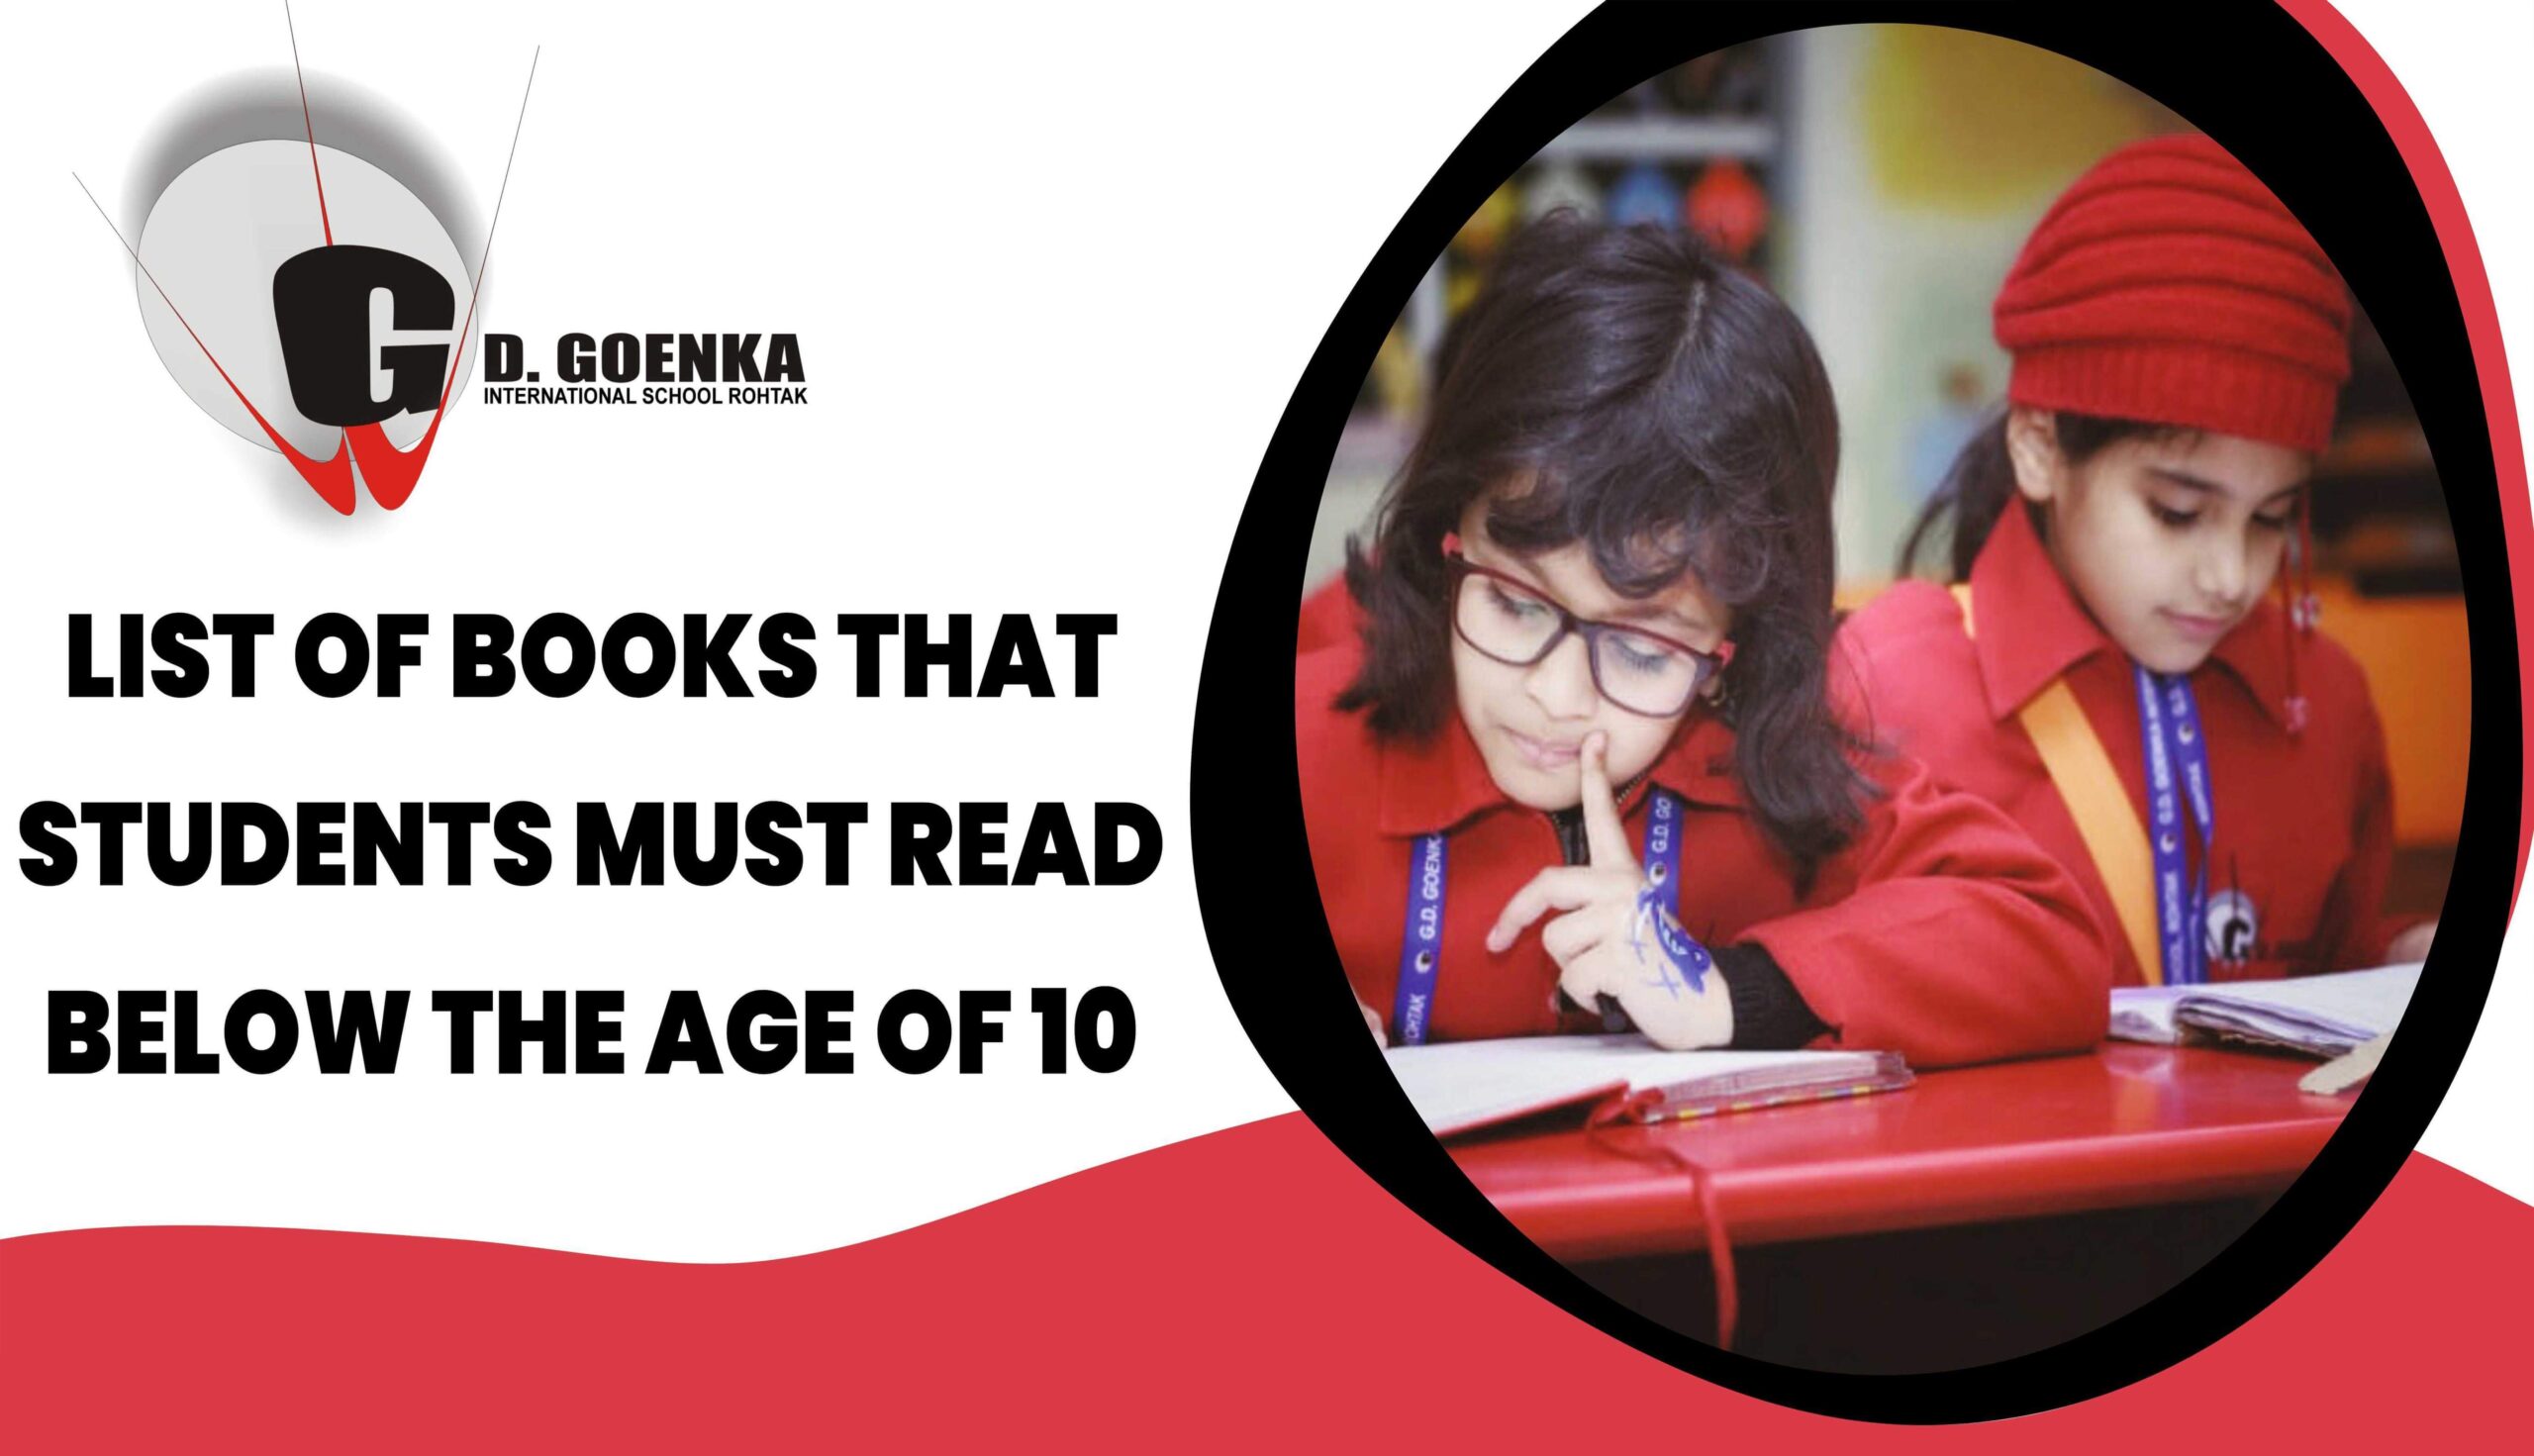 List of Books that students must read below the age